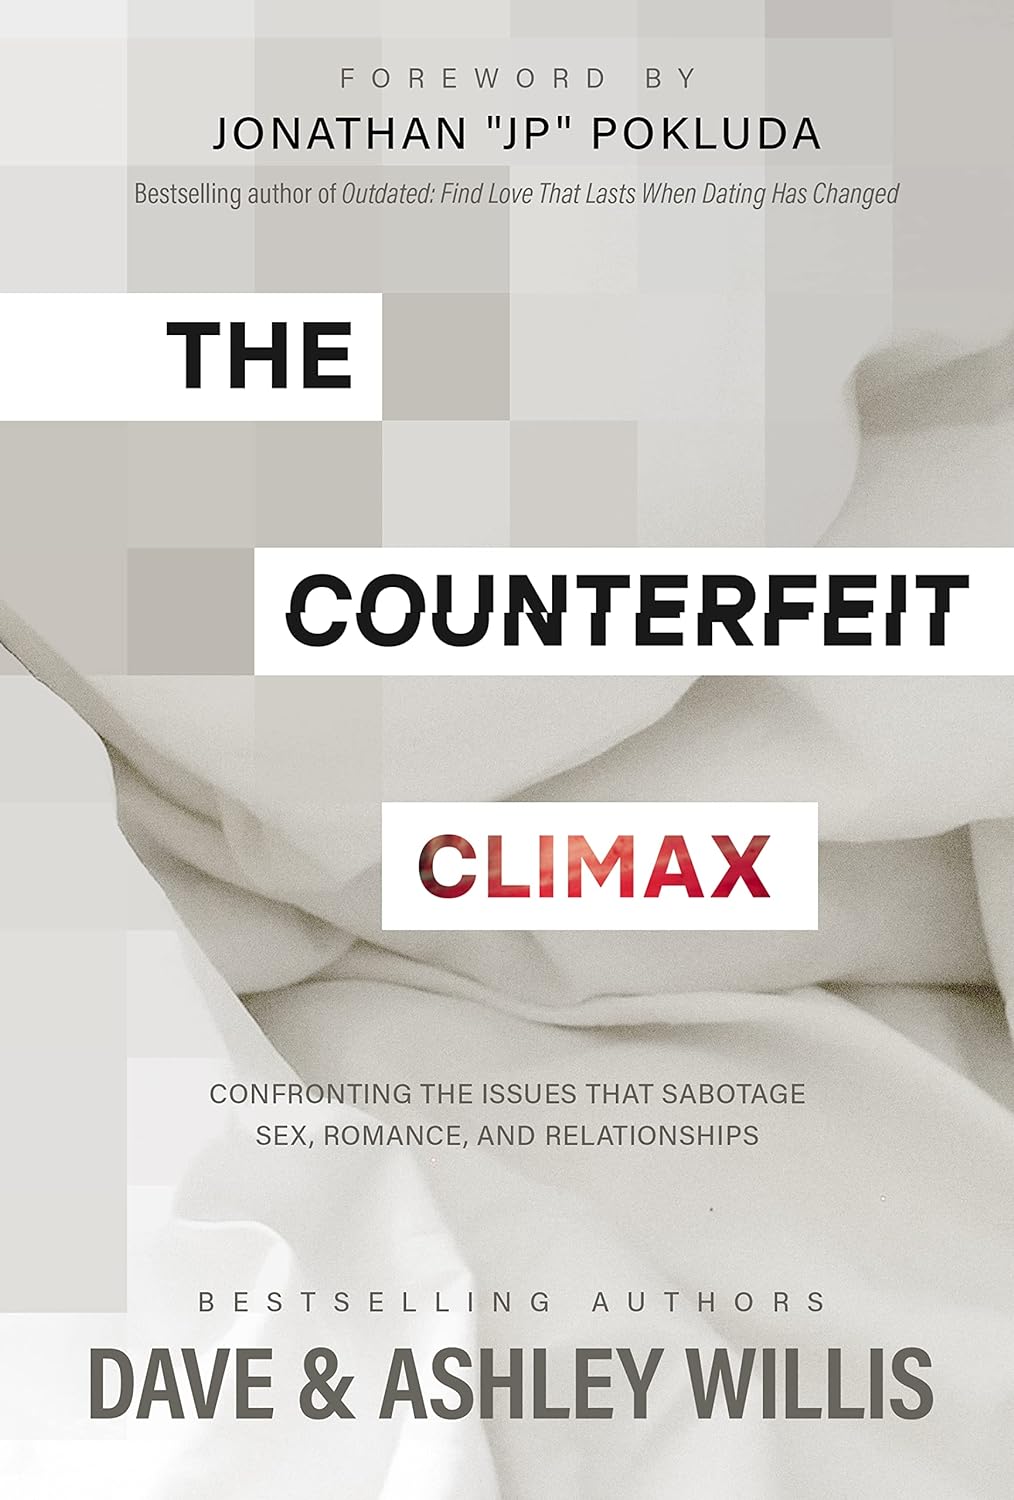 The Counterfeit Climax: Confronting the Issues that Sabotage Sex, Romance, and Relationships